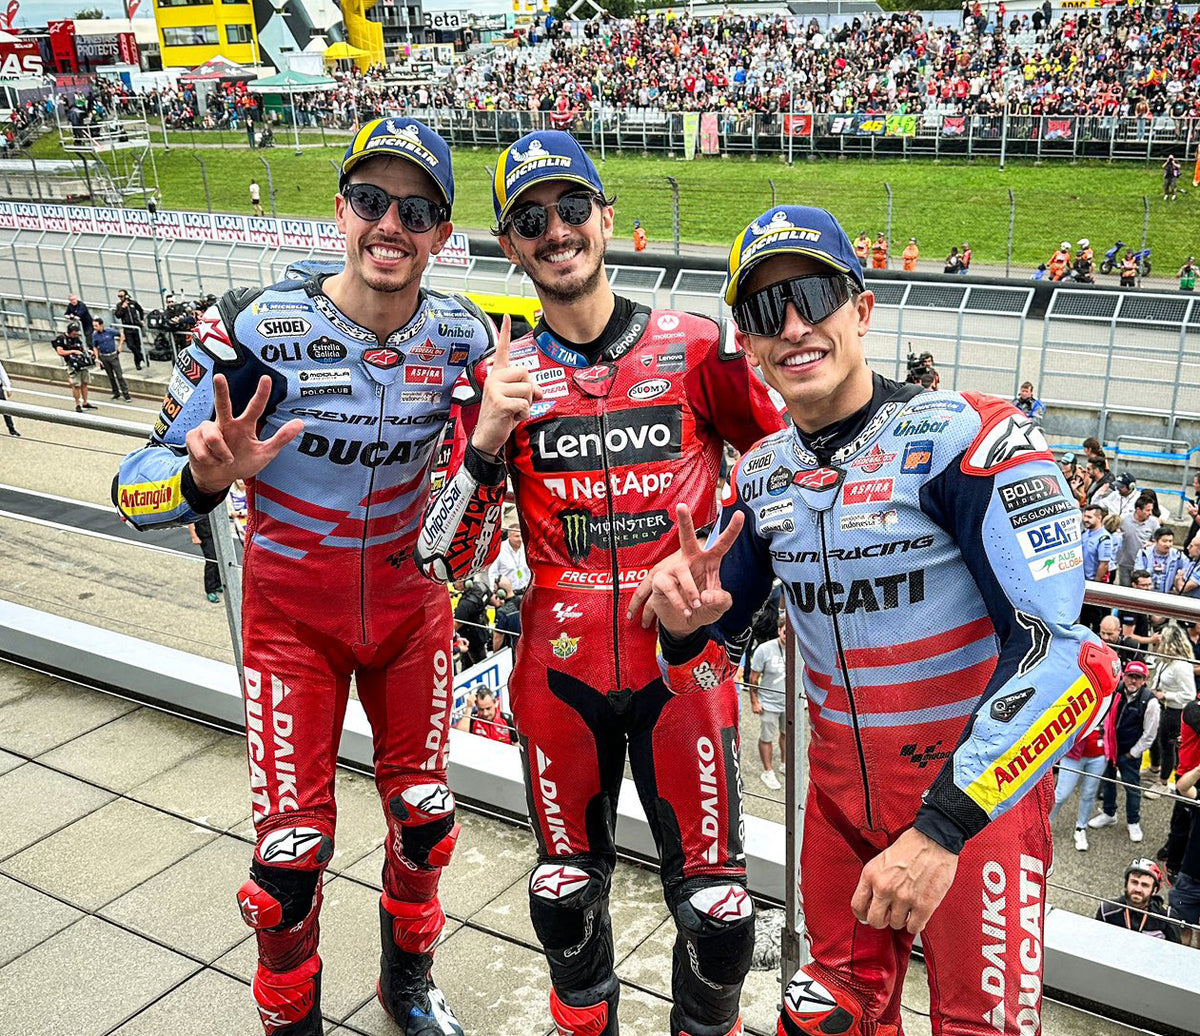 ALPINESTARS TOP FOUR LOCK-OUT AS PECCO BAGNAIA WINS MOTOGP RACE AT THE SACHSENRING, GERMANY